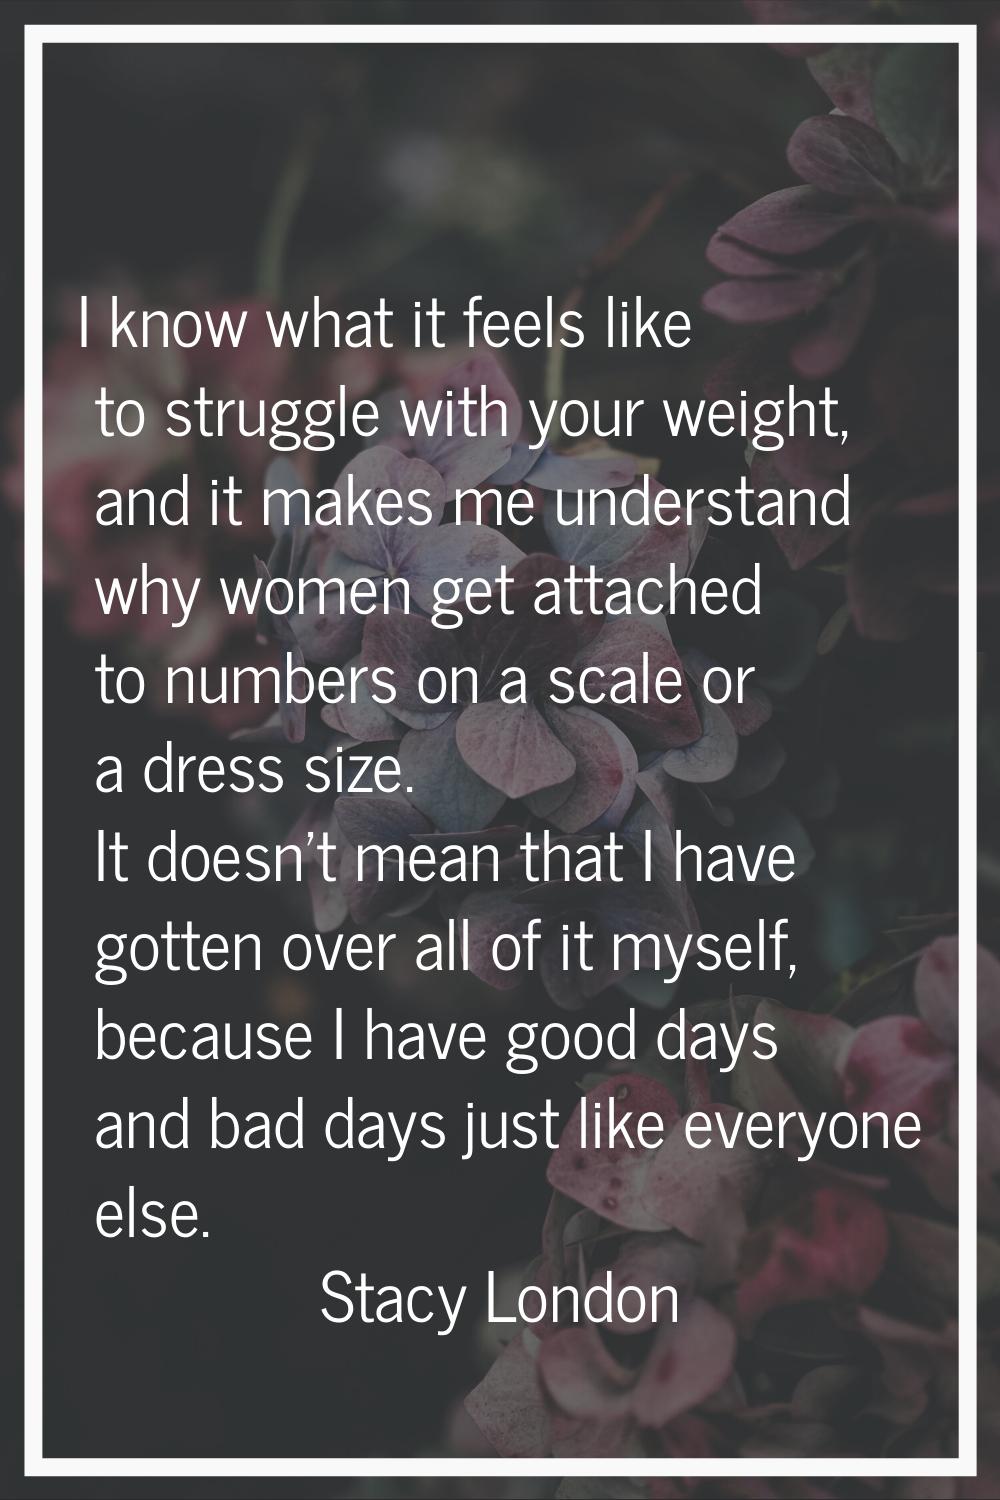 I know what it feels like to struggle with your weight, and it makes me understand why women get at